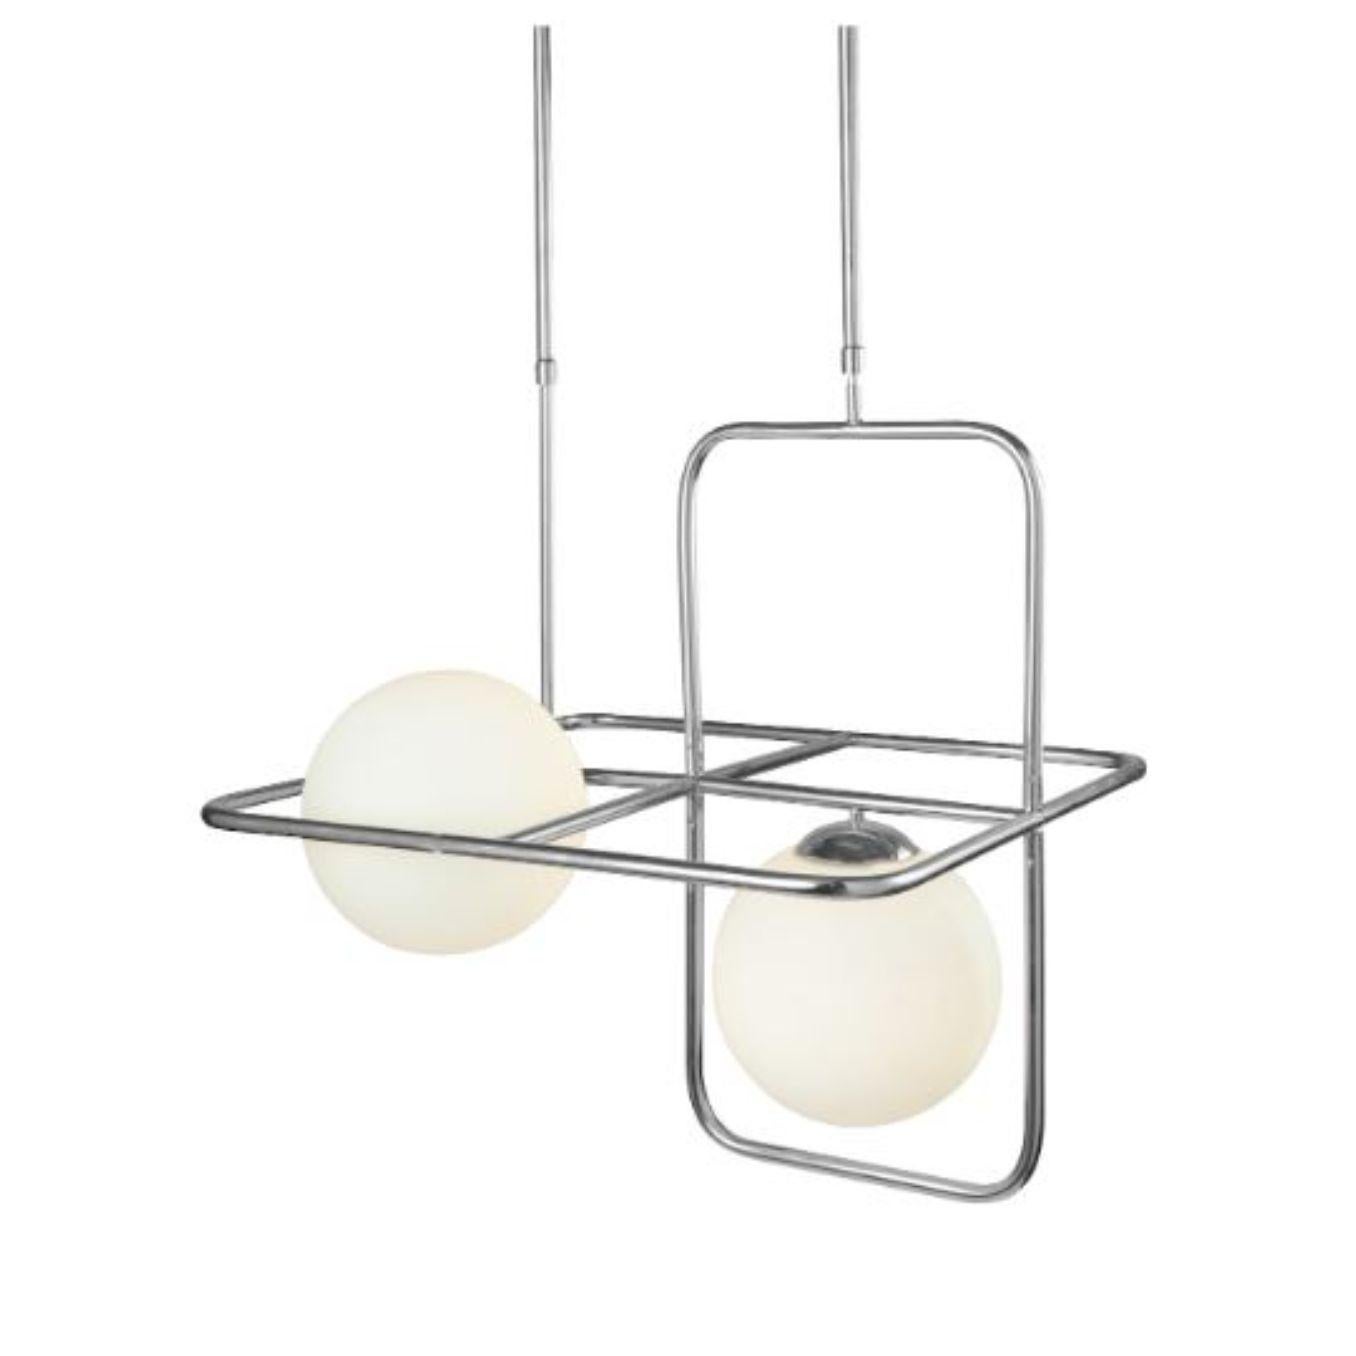 Nickel link III suspension lamp by Dooq.
Dimensions: W 64 x D 64 x H 64 cm
Materials: lacquered metal, polished or brushed metal, nickel.
Also available in different colors and materials. 

Information:
230V/50Hz
2 x max. G9
5W